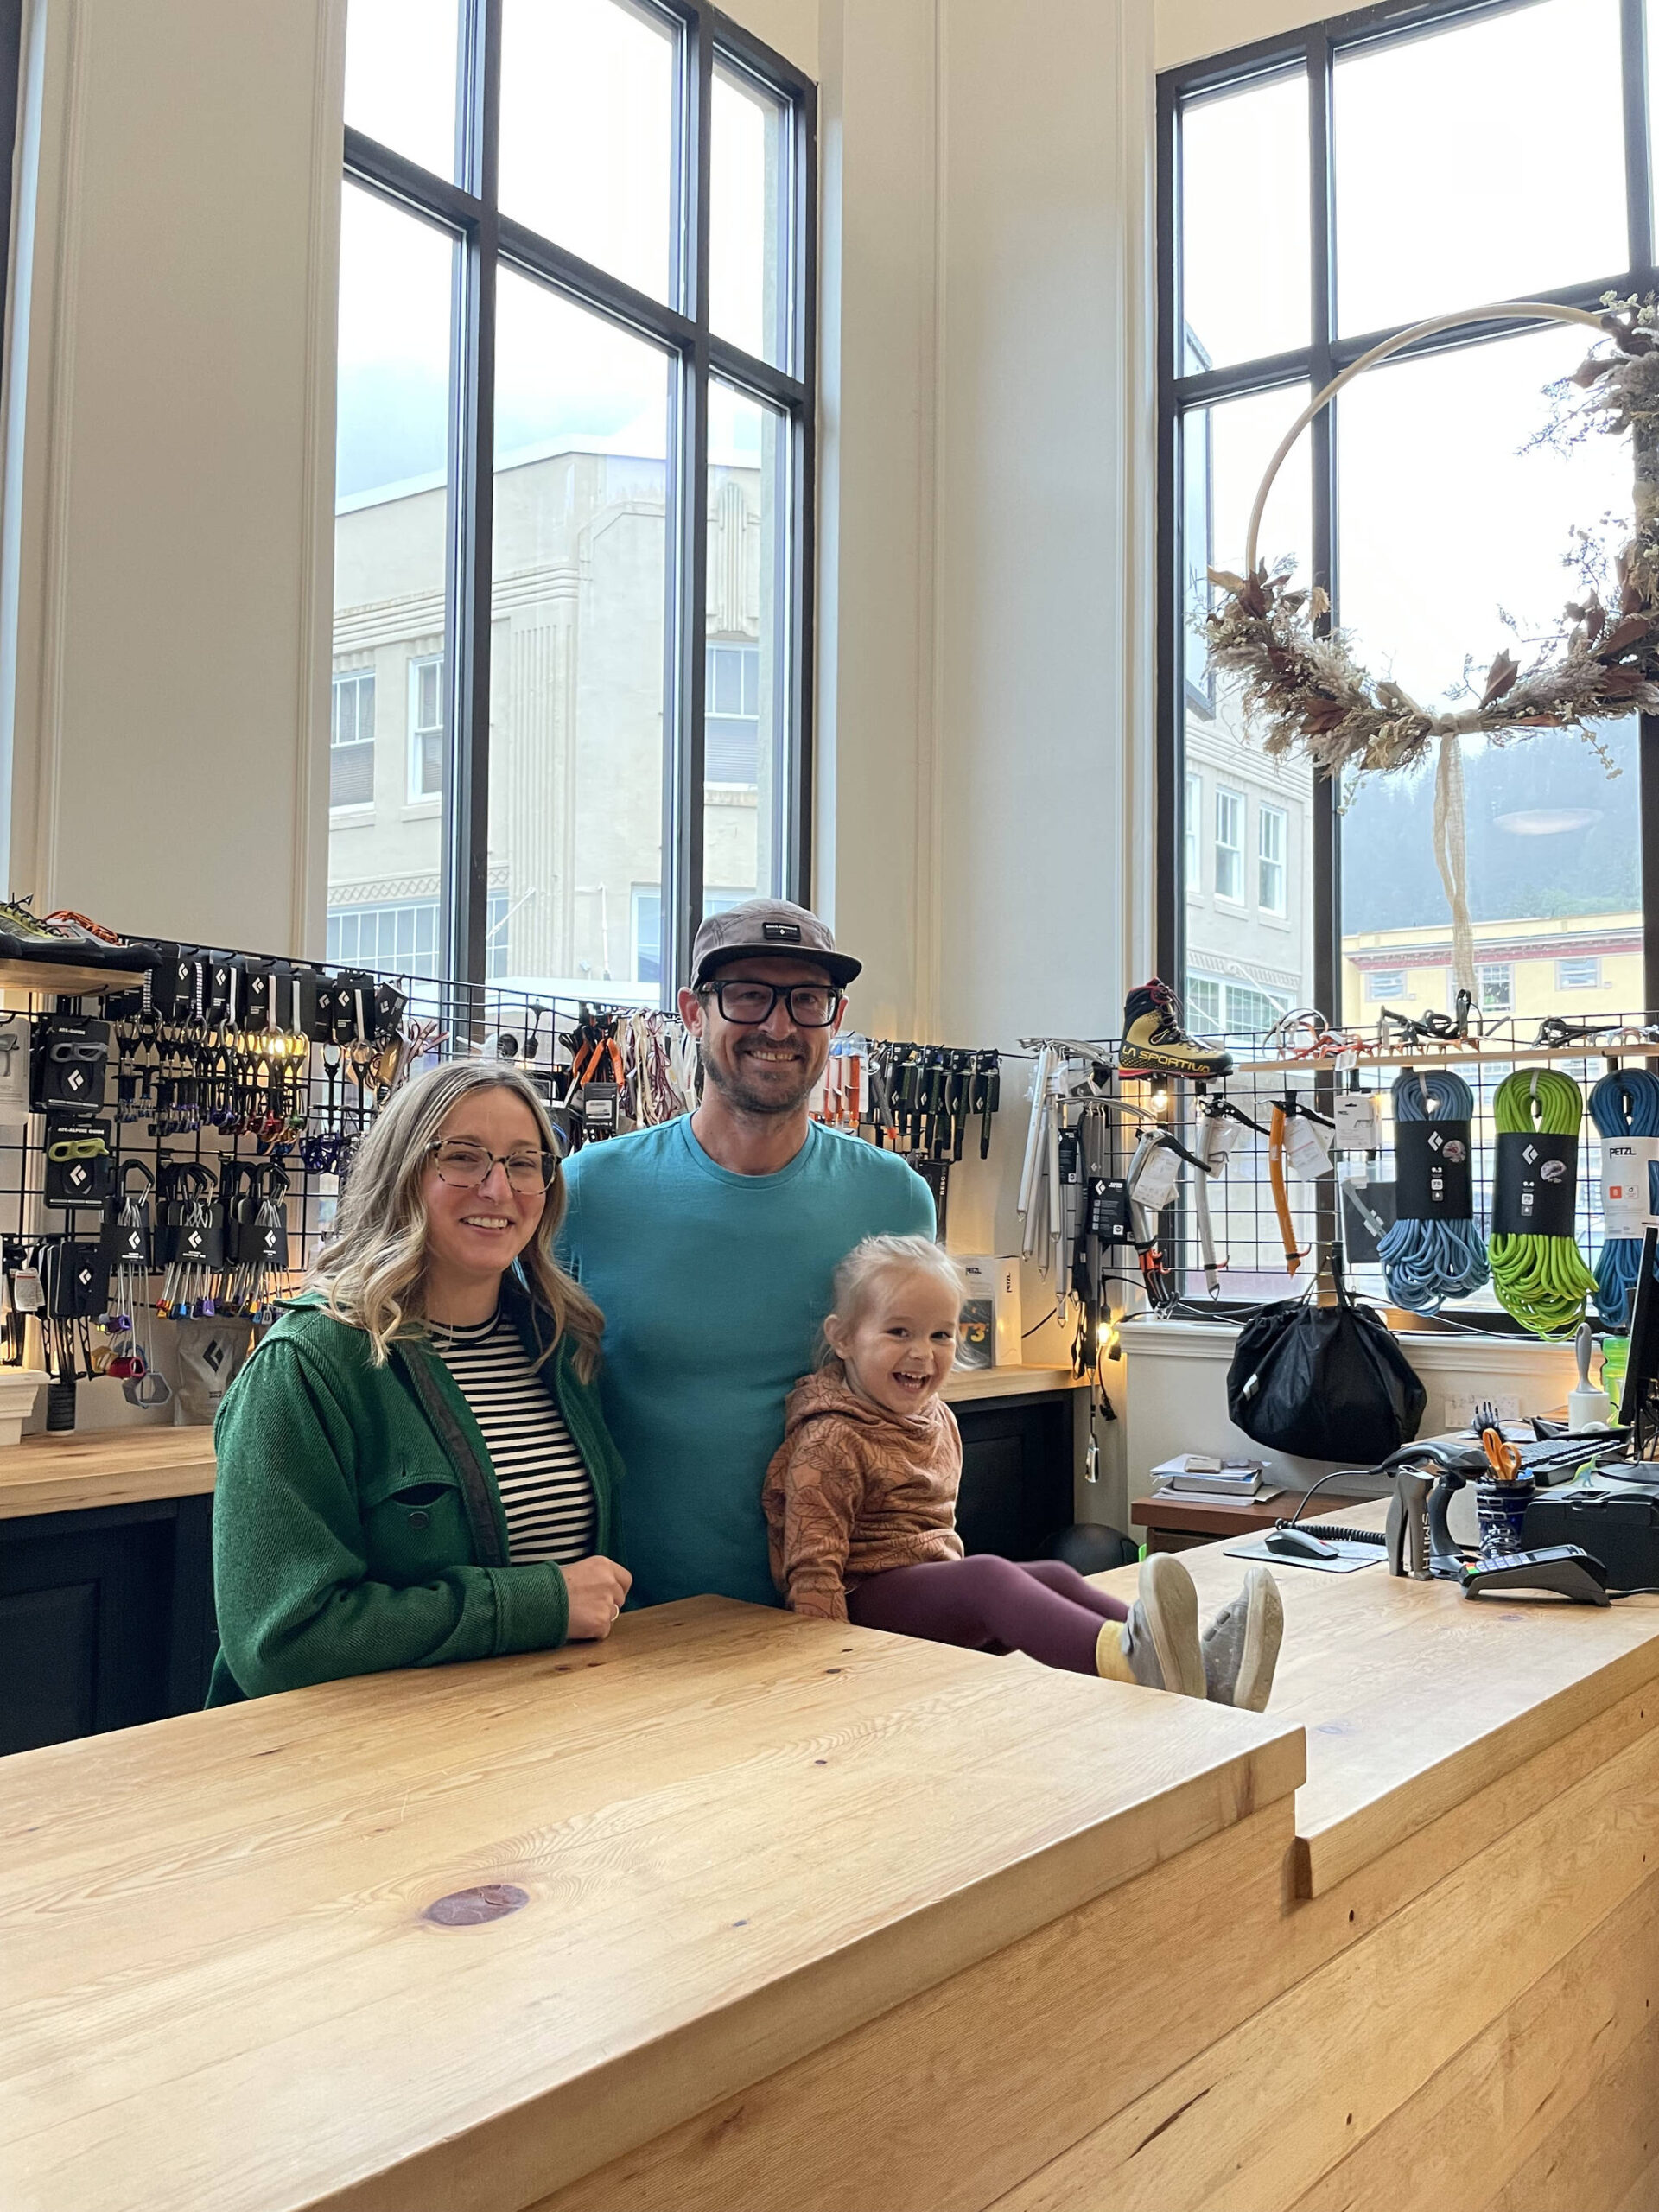 Foggy Mountain Shop owners Sean Reilly and Courtney Nicholl with their daughter Alder stand at their custom-built Icy Straits Lumber counter. Courtney designed the space to focus attention on inspiring outdoors activities with the steep mountain backdrop. (Photo by Laurie Craig)